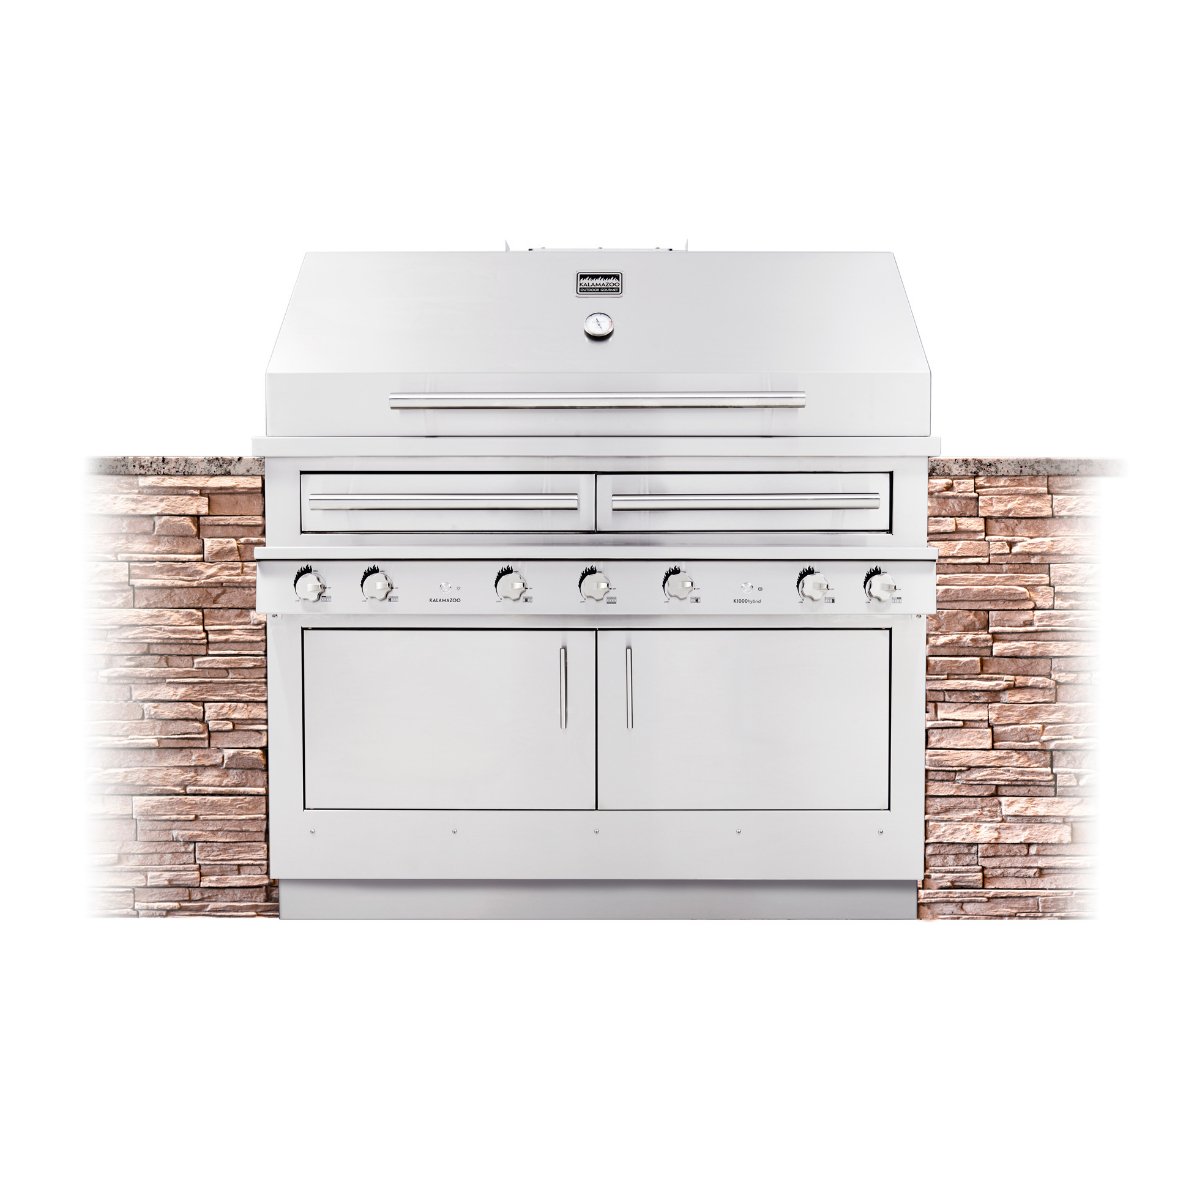 Kalamazoo Hybrid Fire Built-In Grill - K1000HB-2-1-EUNG- S4 - Kitchen In The Garden